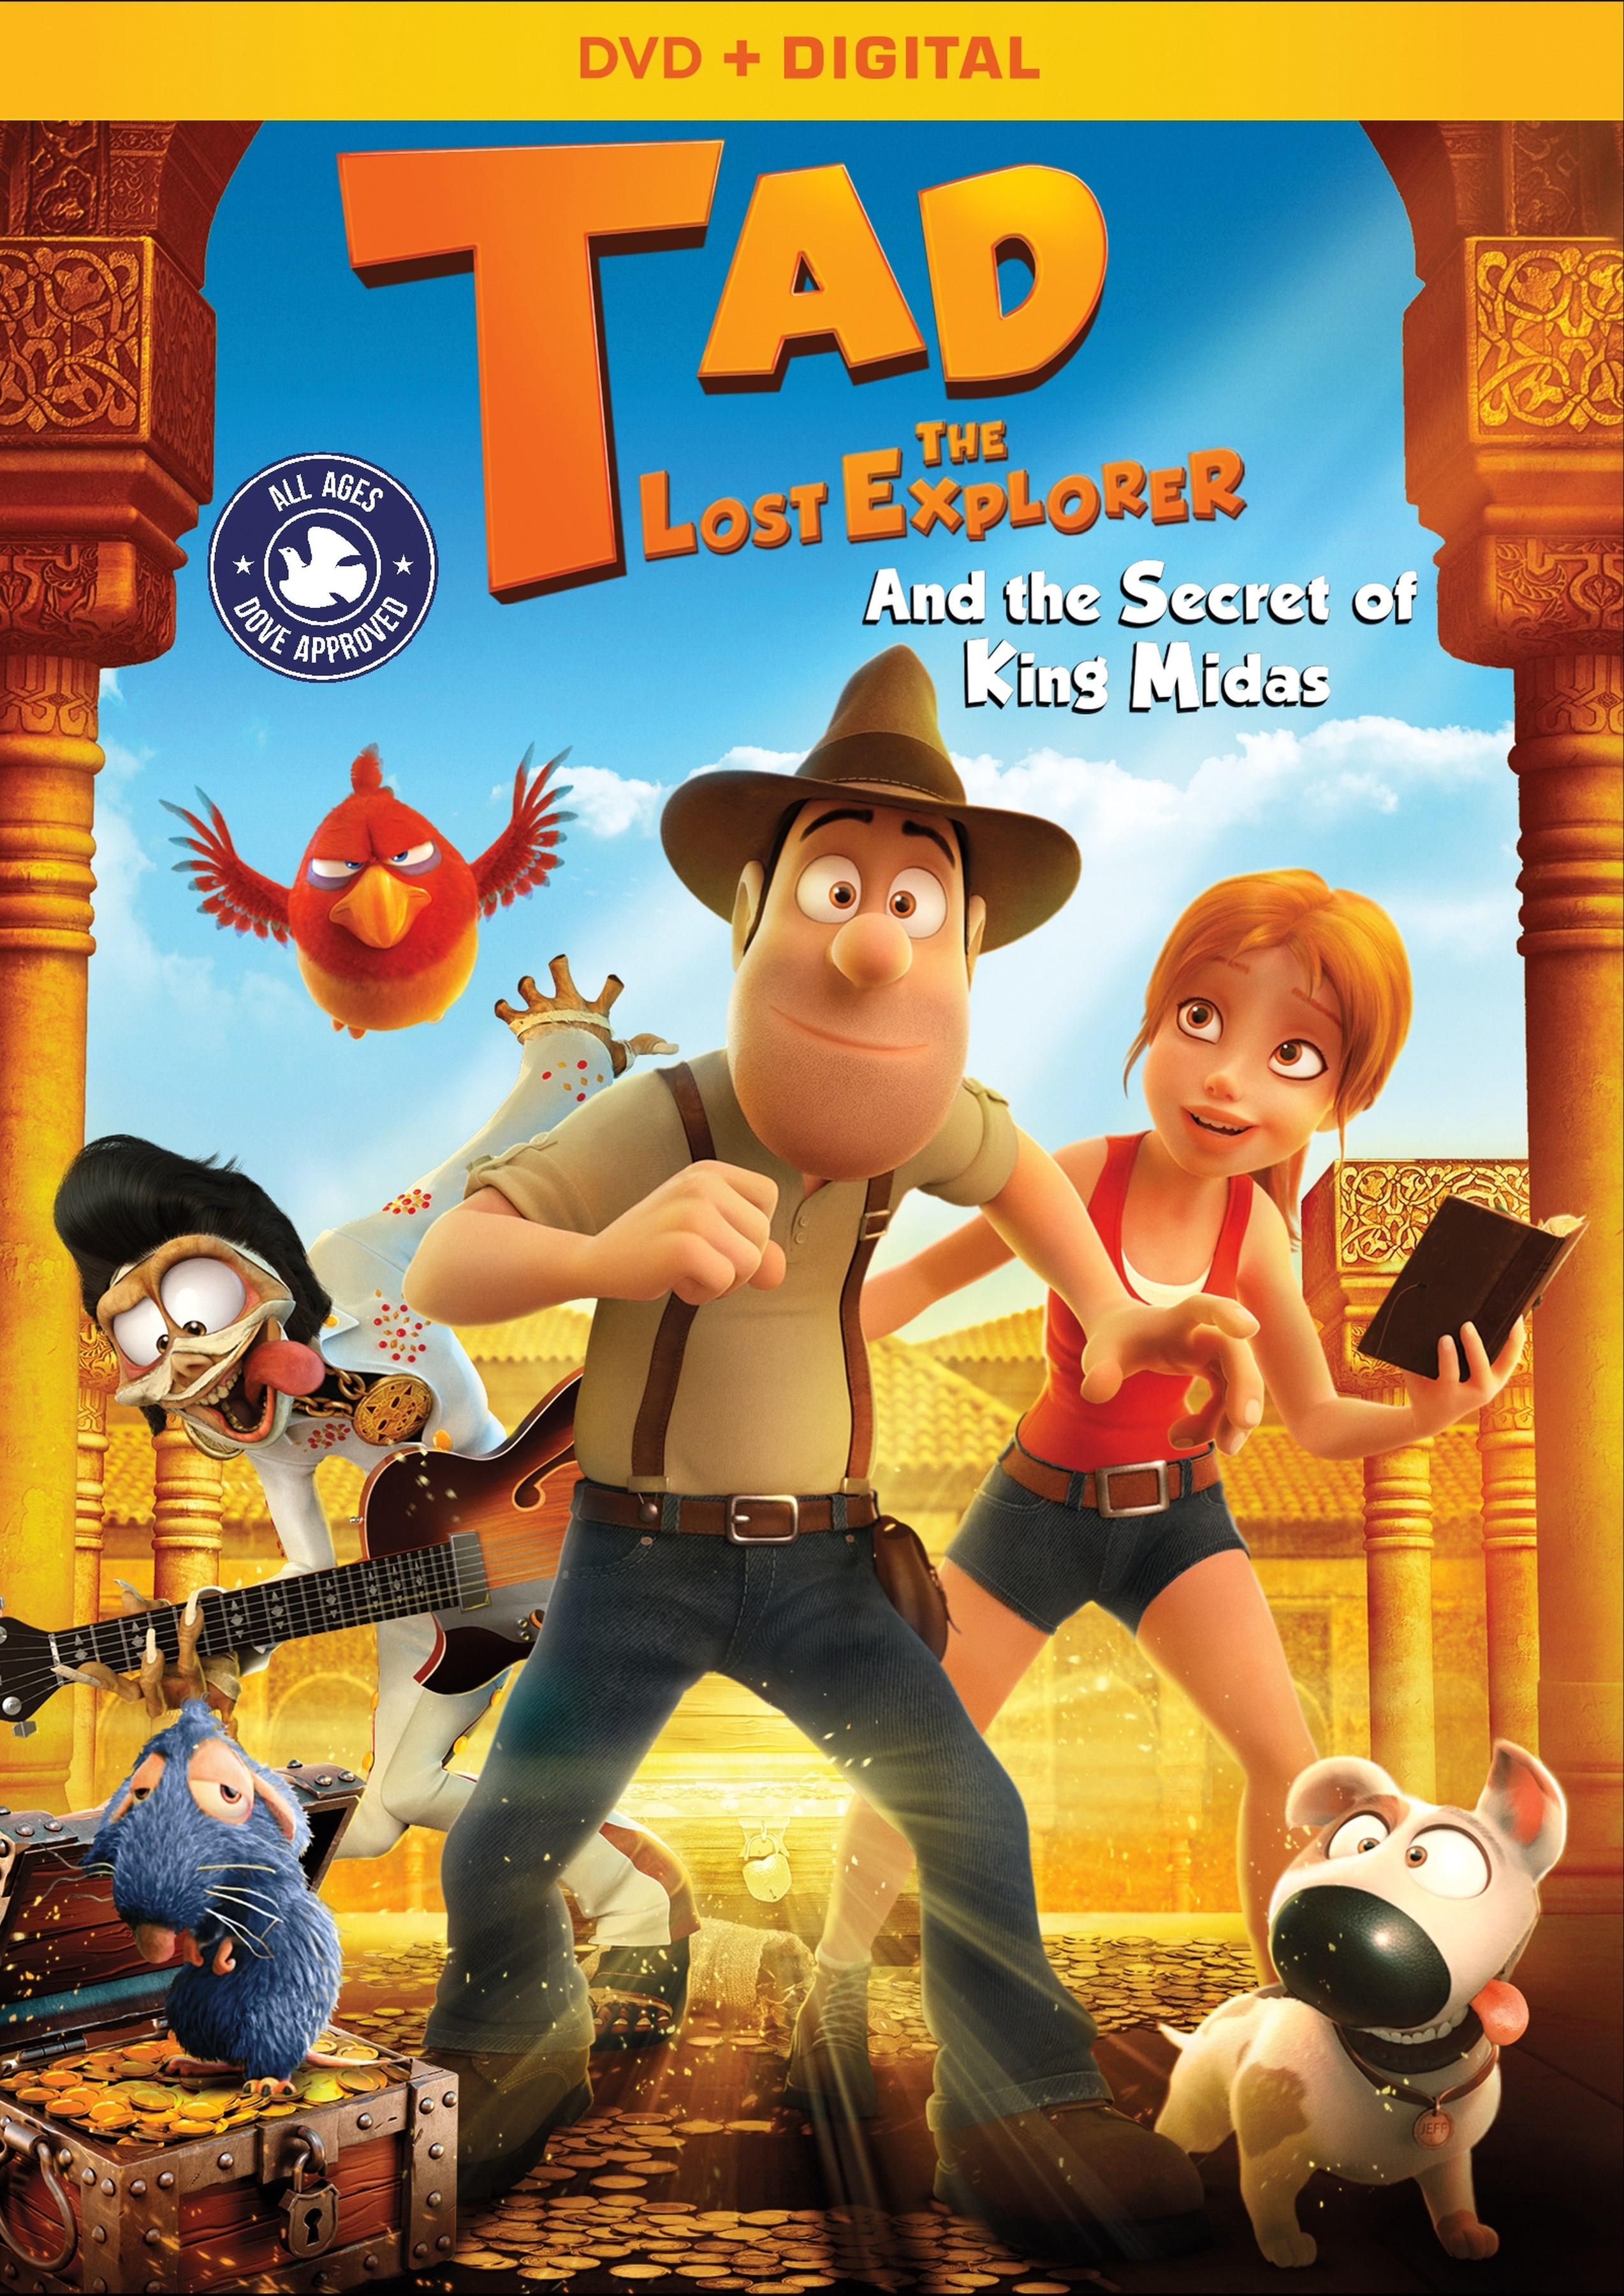 Tad The Lost Explorer And The Secret Of King Midas DVD Cover (Paramount Home Media)